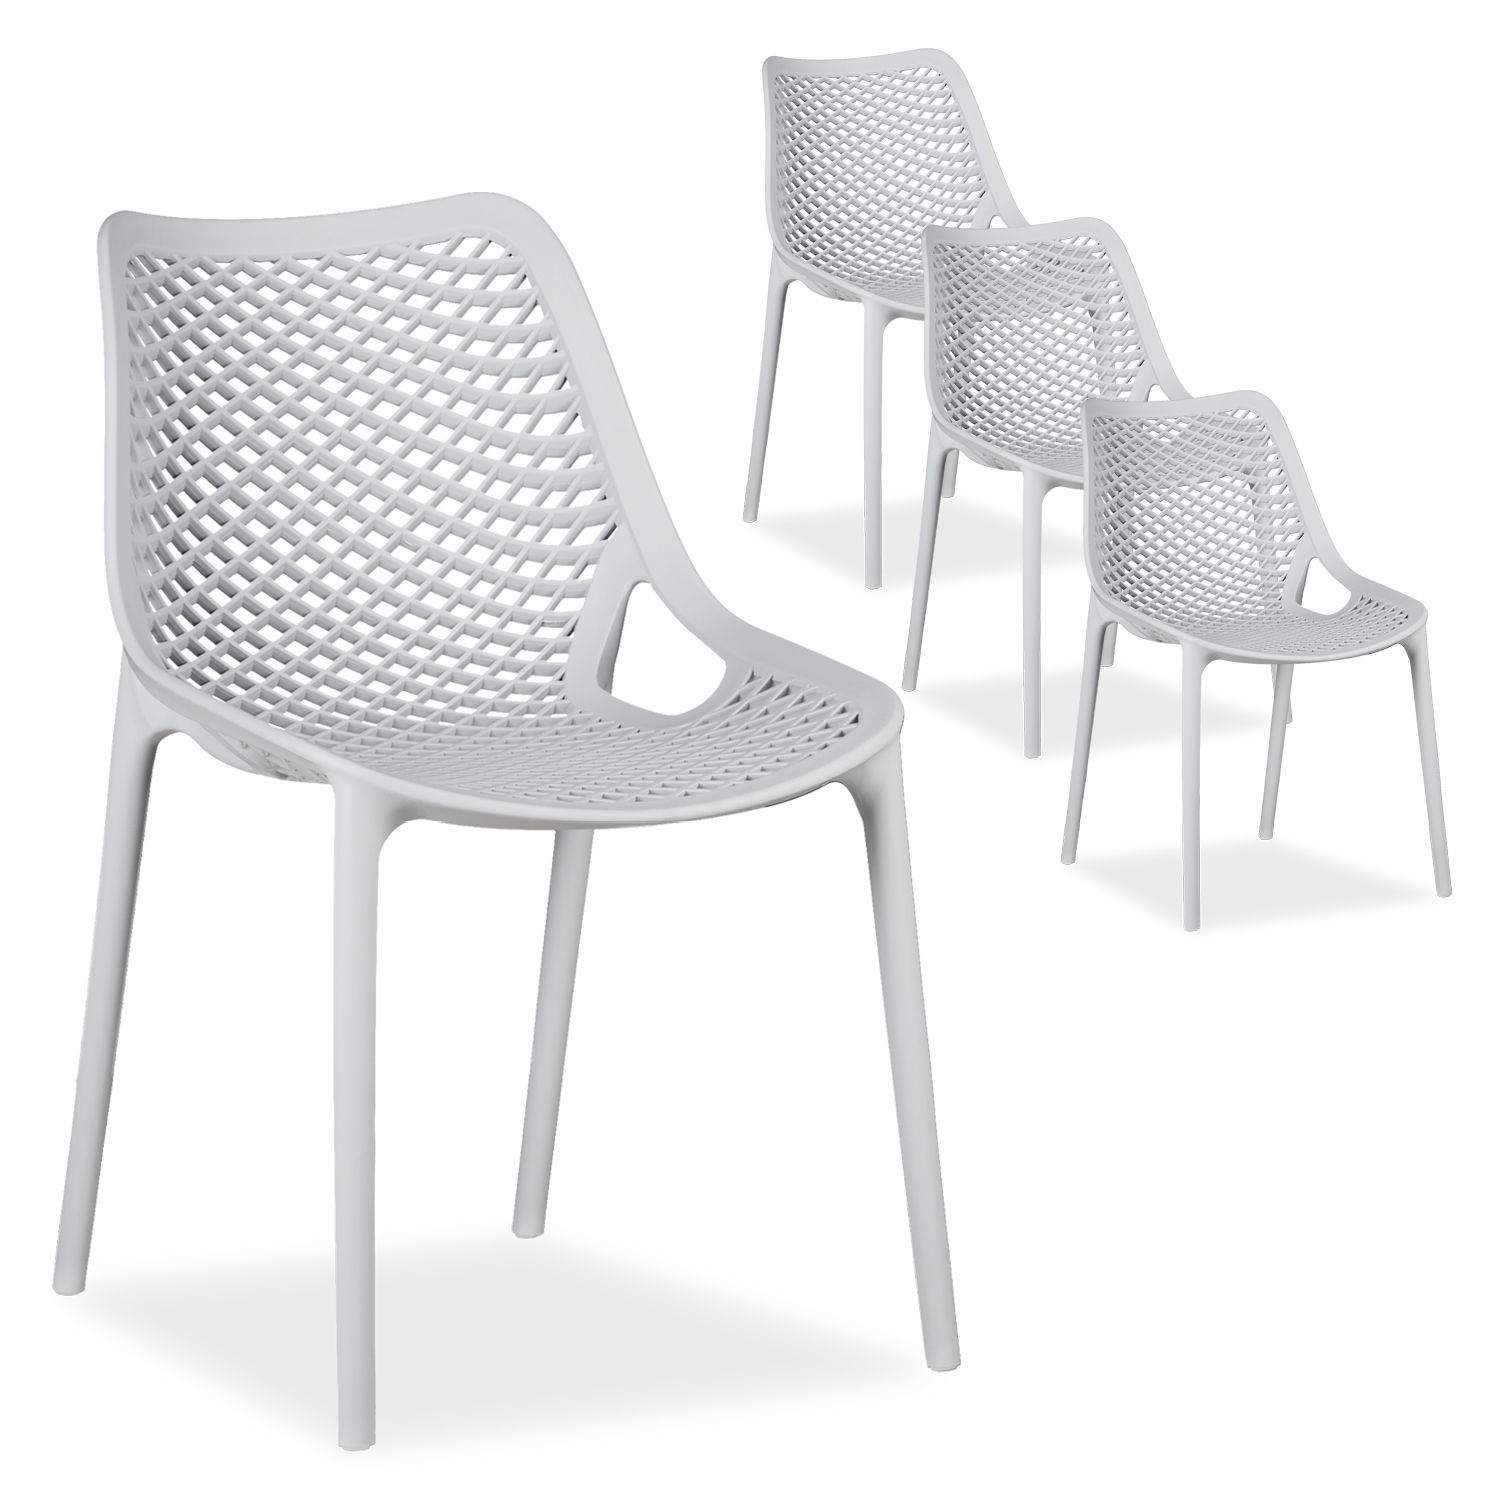 Garden chair Set of 4 Camping chairs Grey Outdoor chairs Plastic Egg chair Lounger chairs Stacking chairs